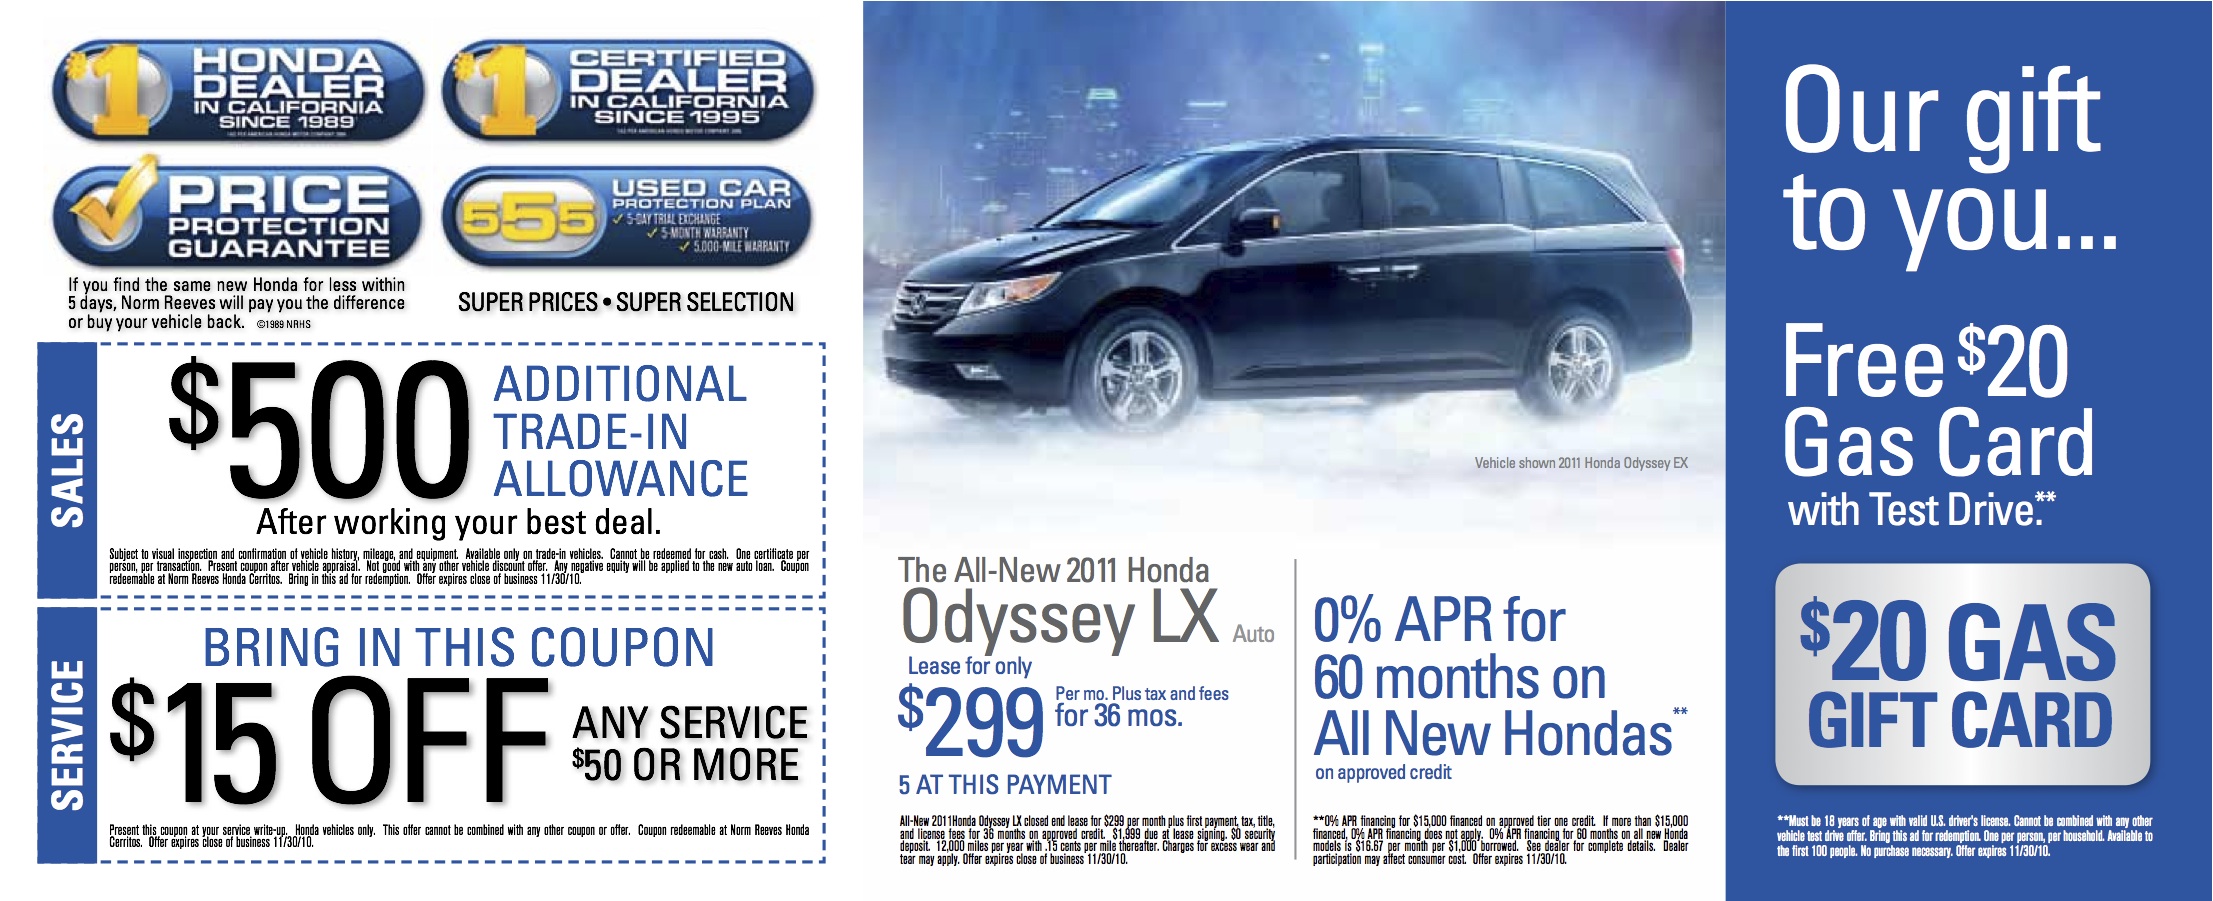 Russell smith honda oil change coupon #1